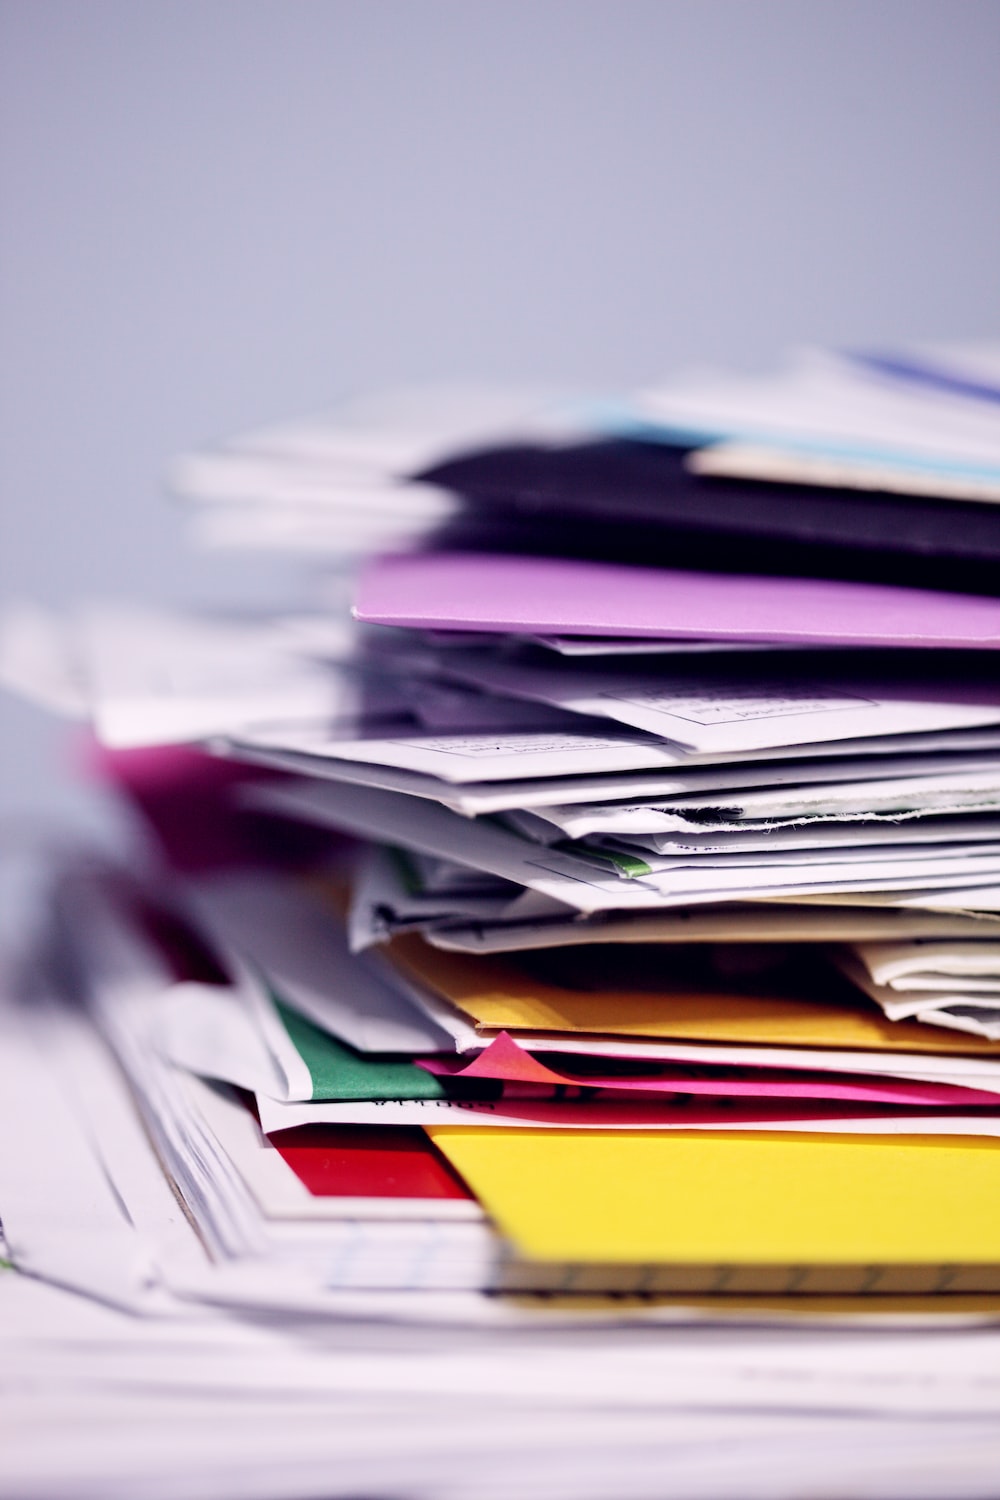 How do you organize bills and mail?